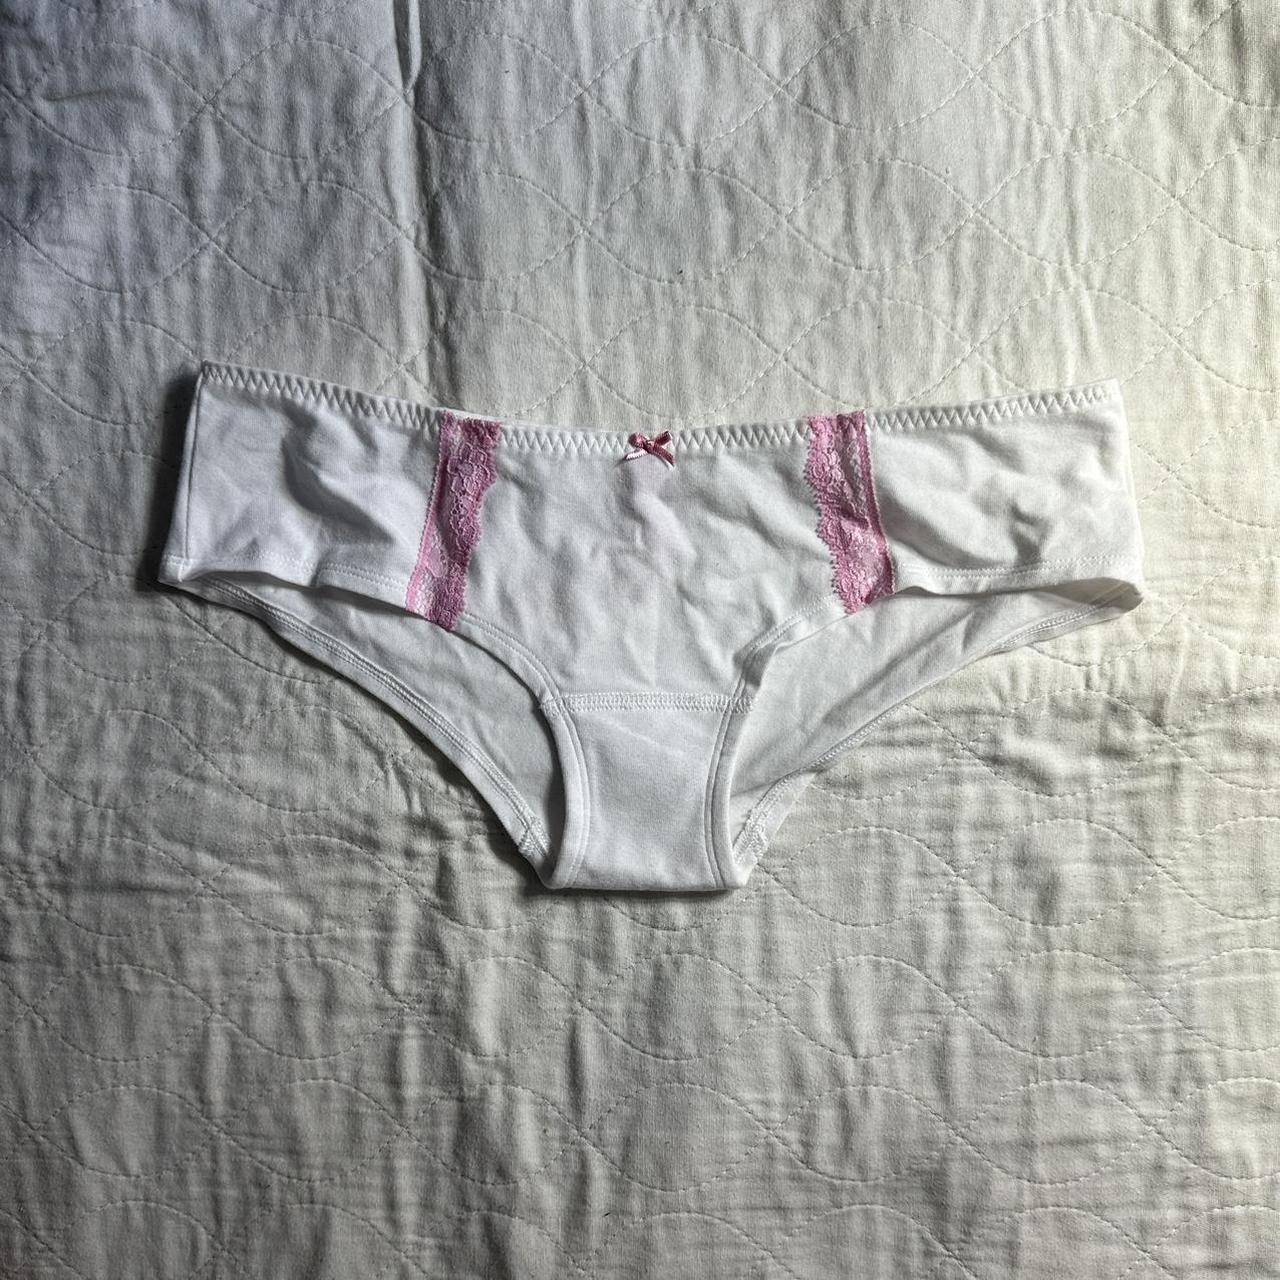 Victoria's Secret Panties Lot Preowned and/or gently - Depop